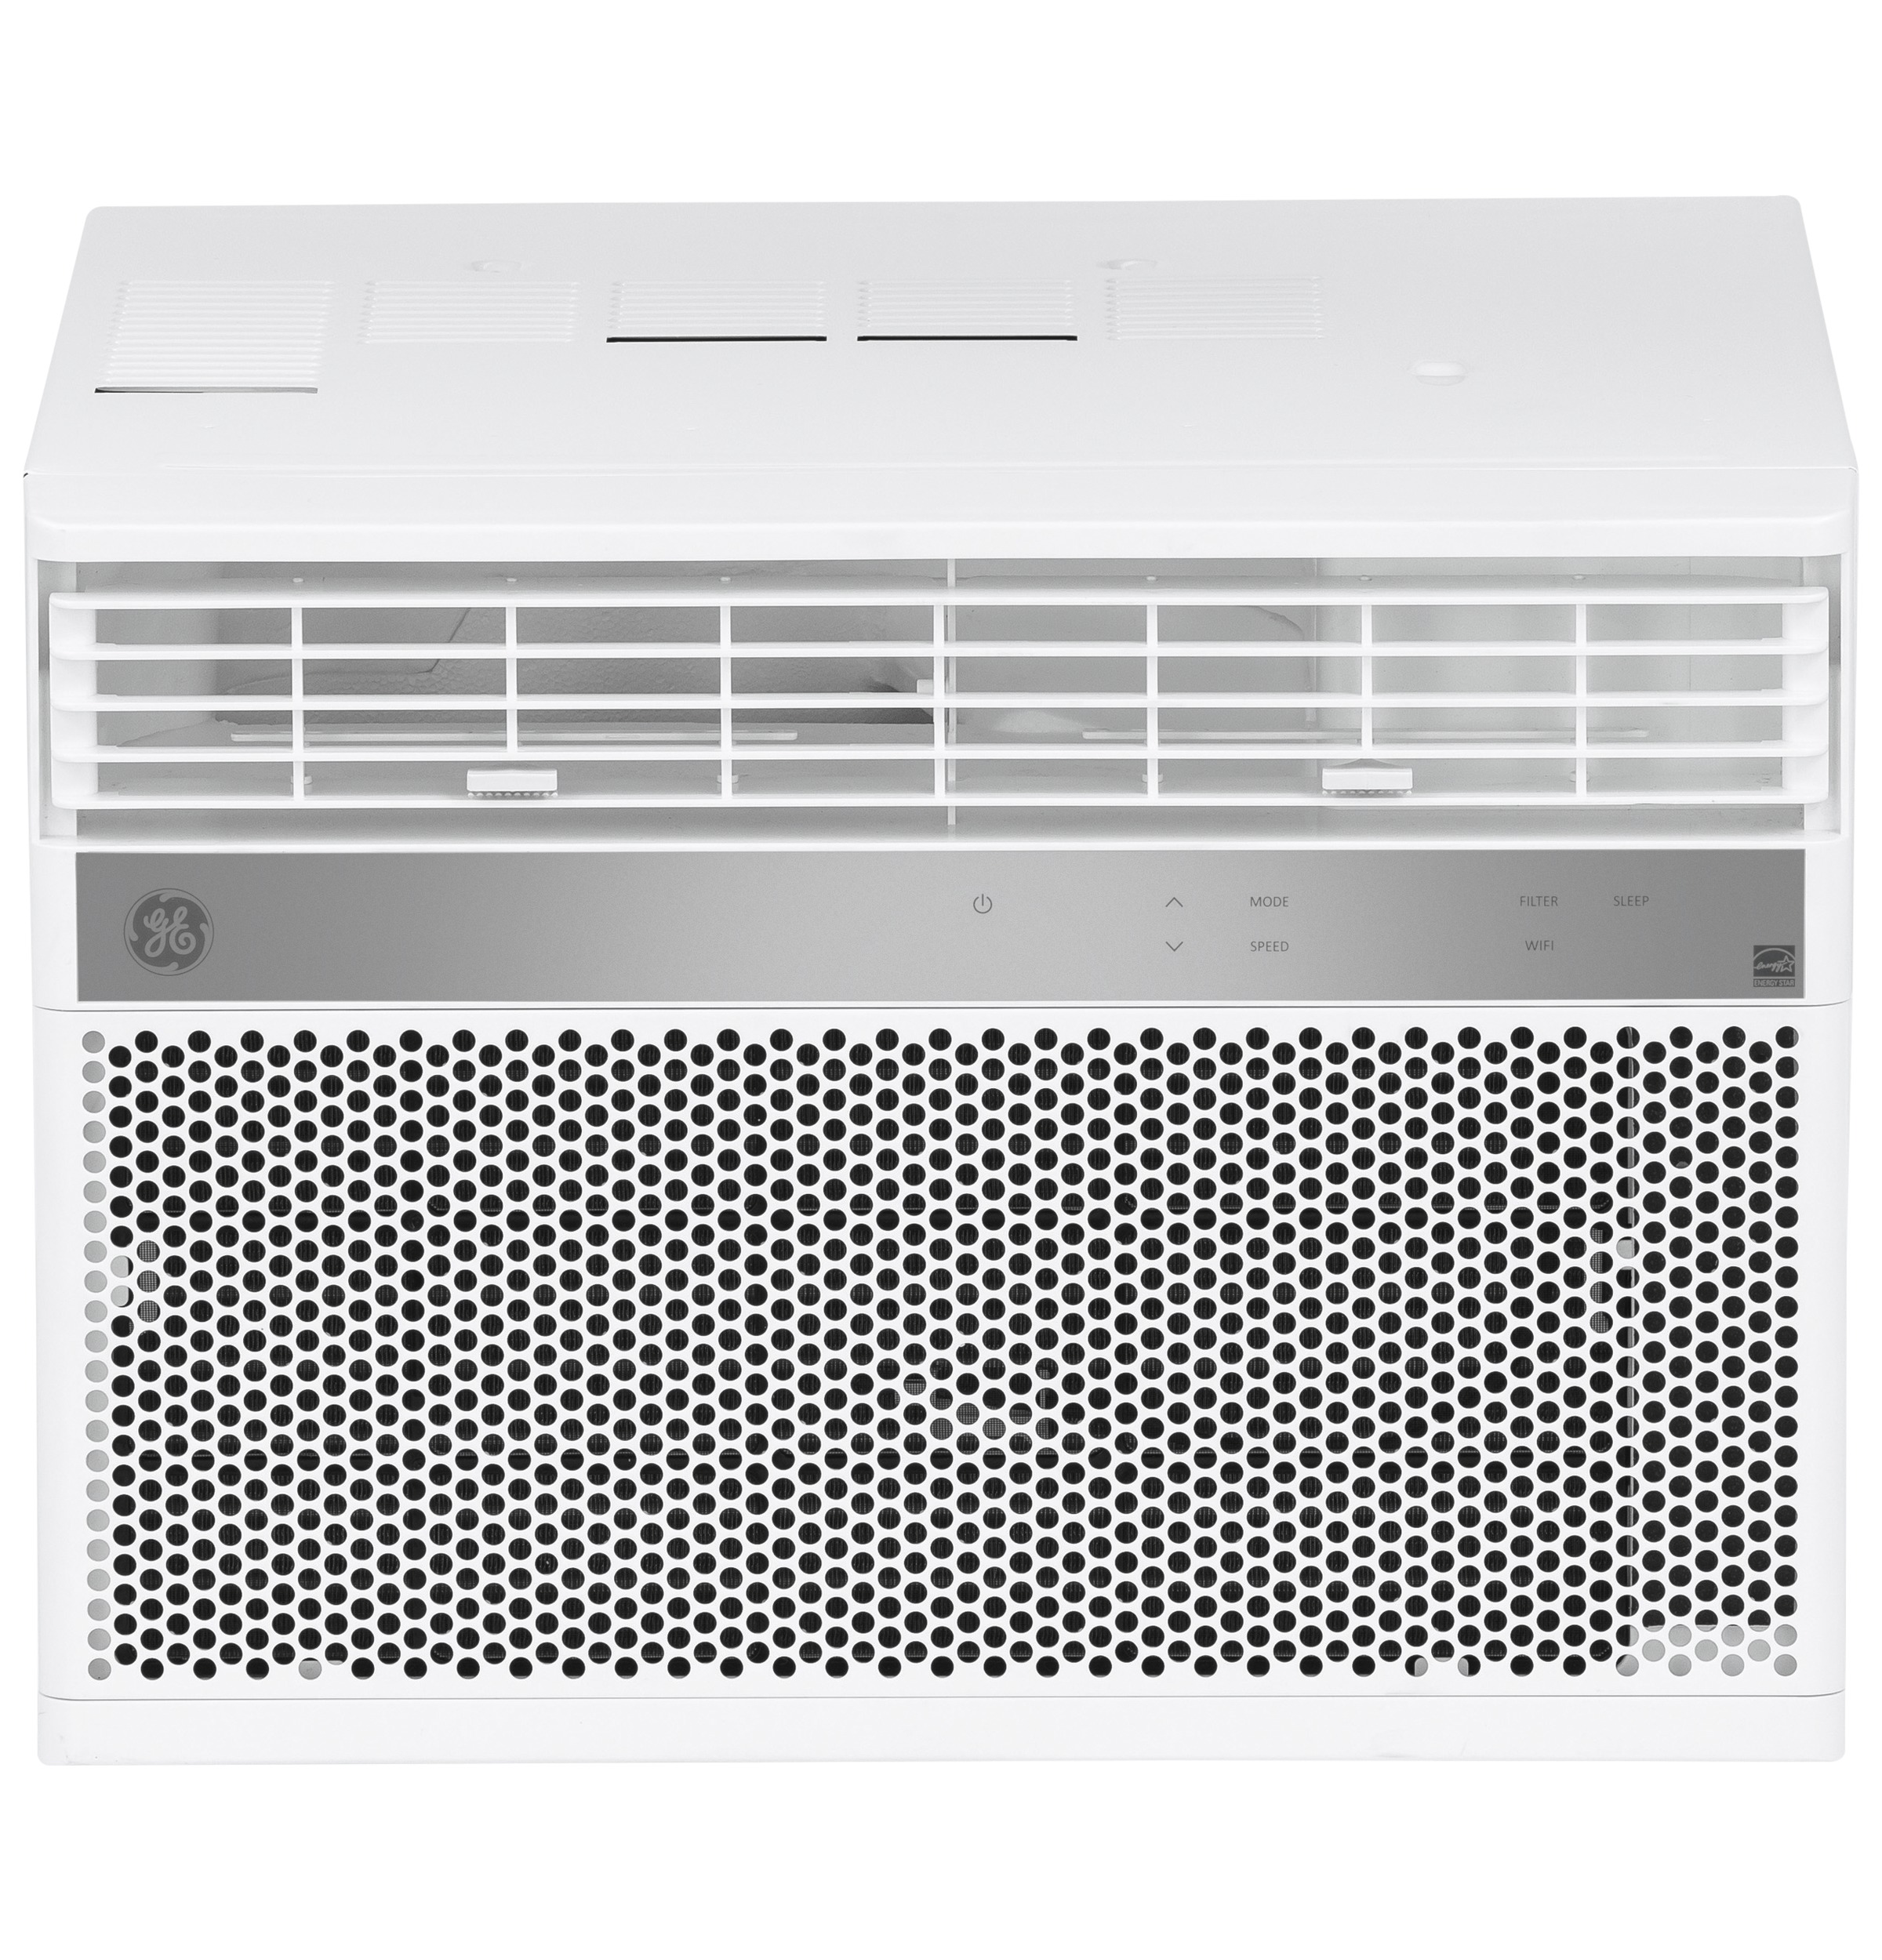 GE® ENERGY STAR® 10,000 BTU Smart Electronic Window Air Conditioner for Medium Rooms up to 450 sq. ft.